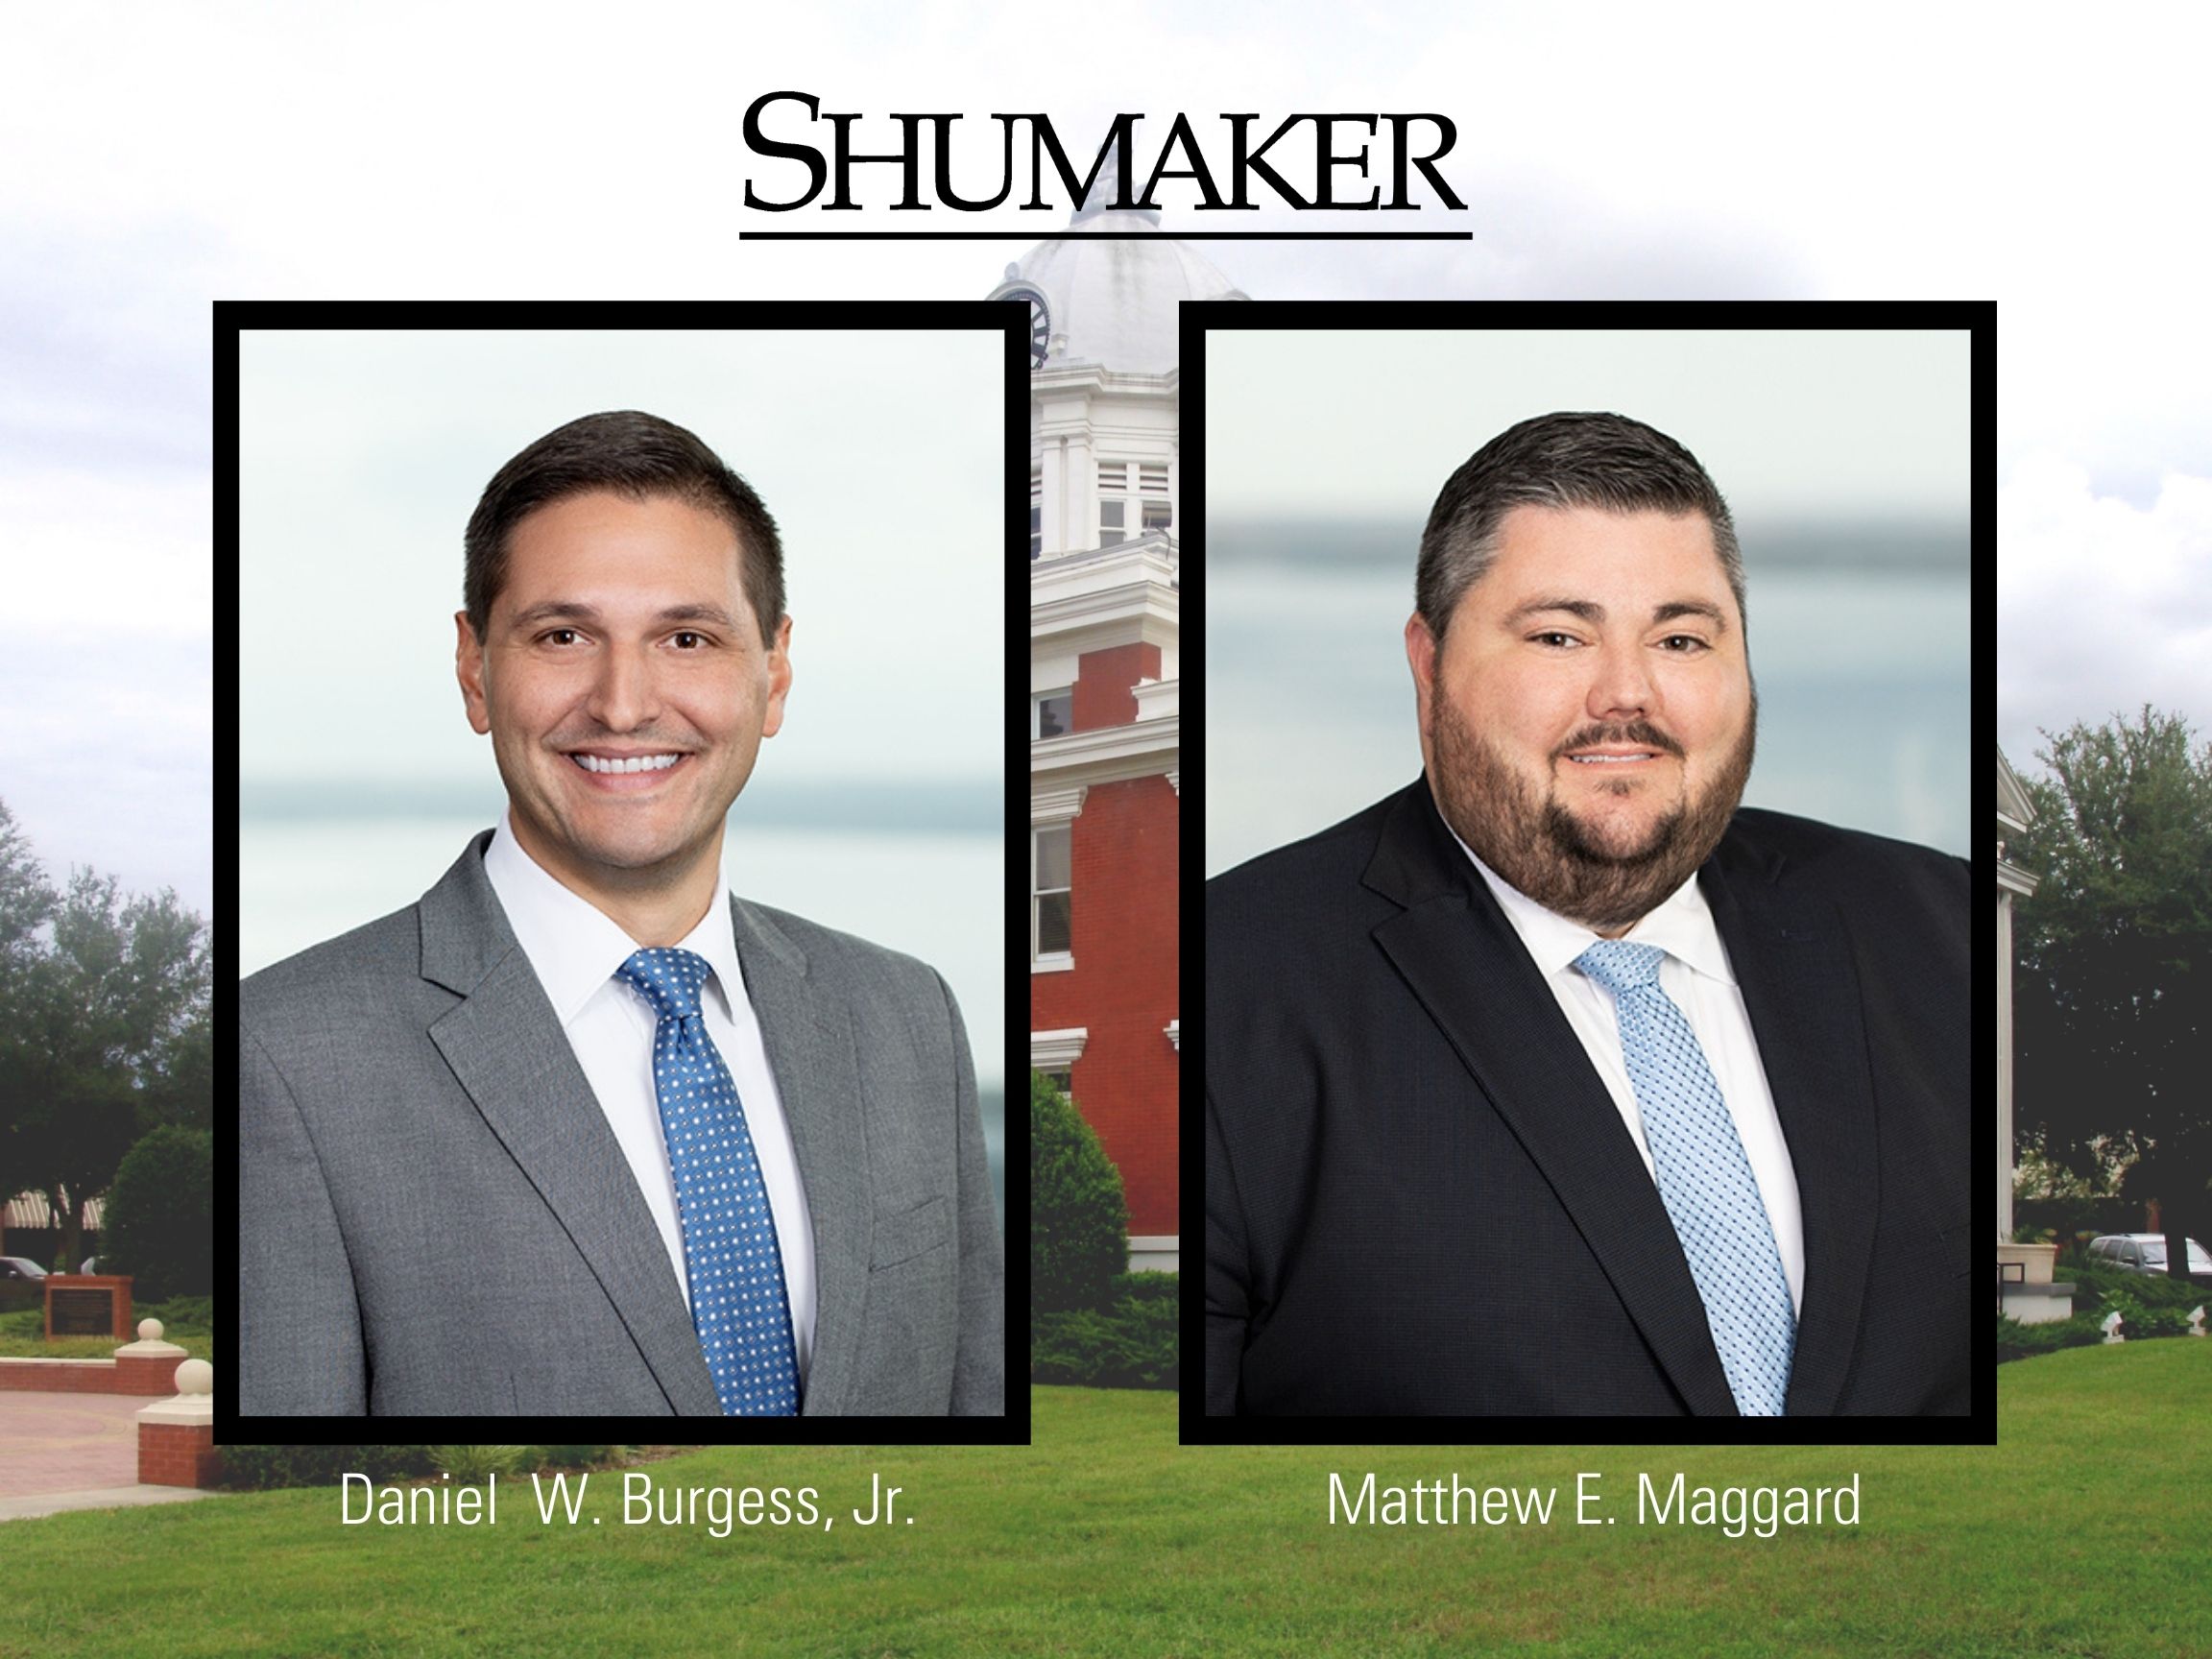 Shumaker Grows in Pasco County by Hiring Attorneys Danny Burgess and Matthew Maggard